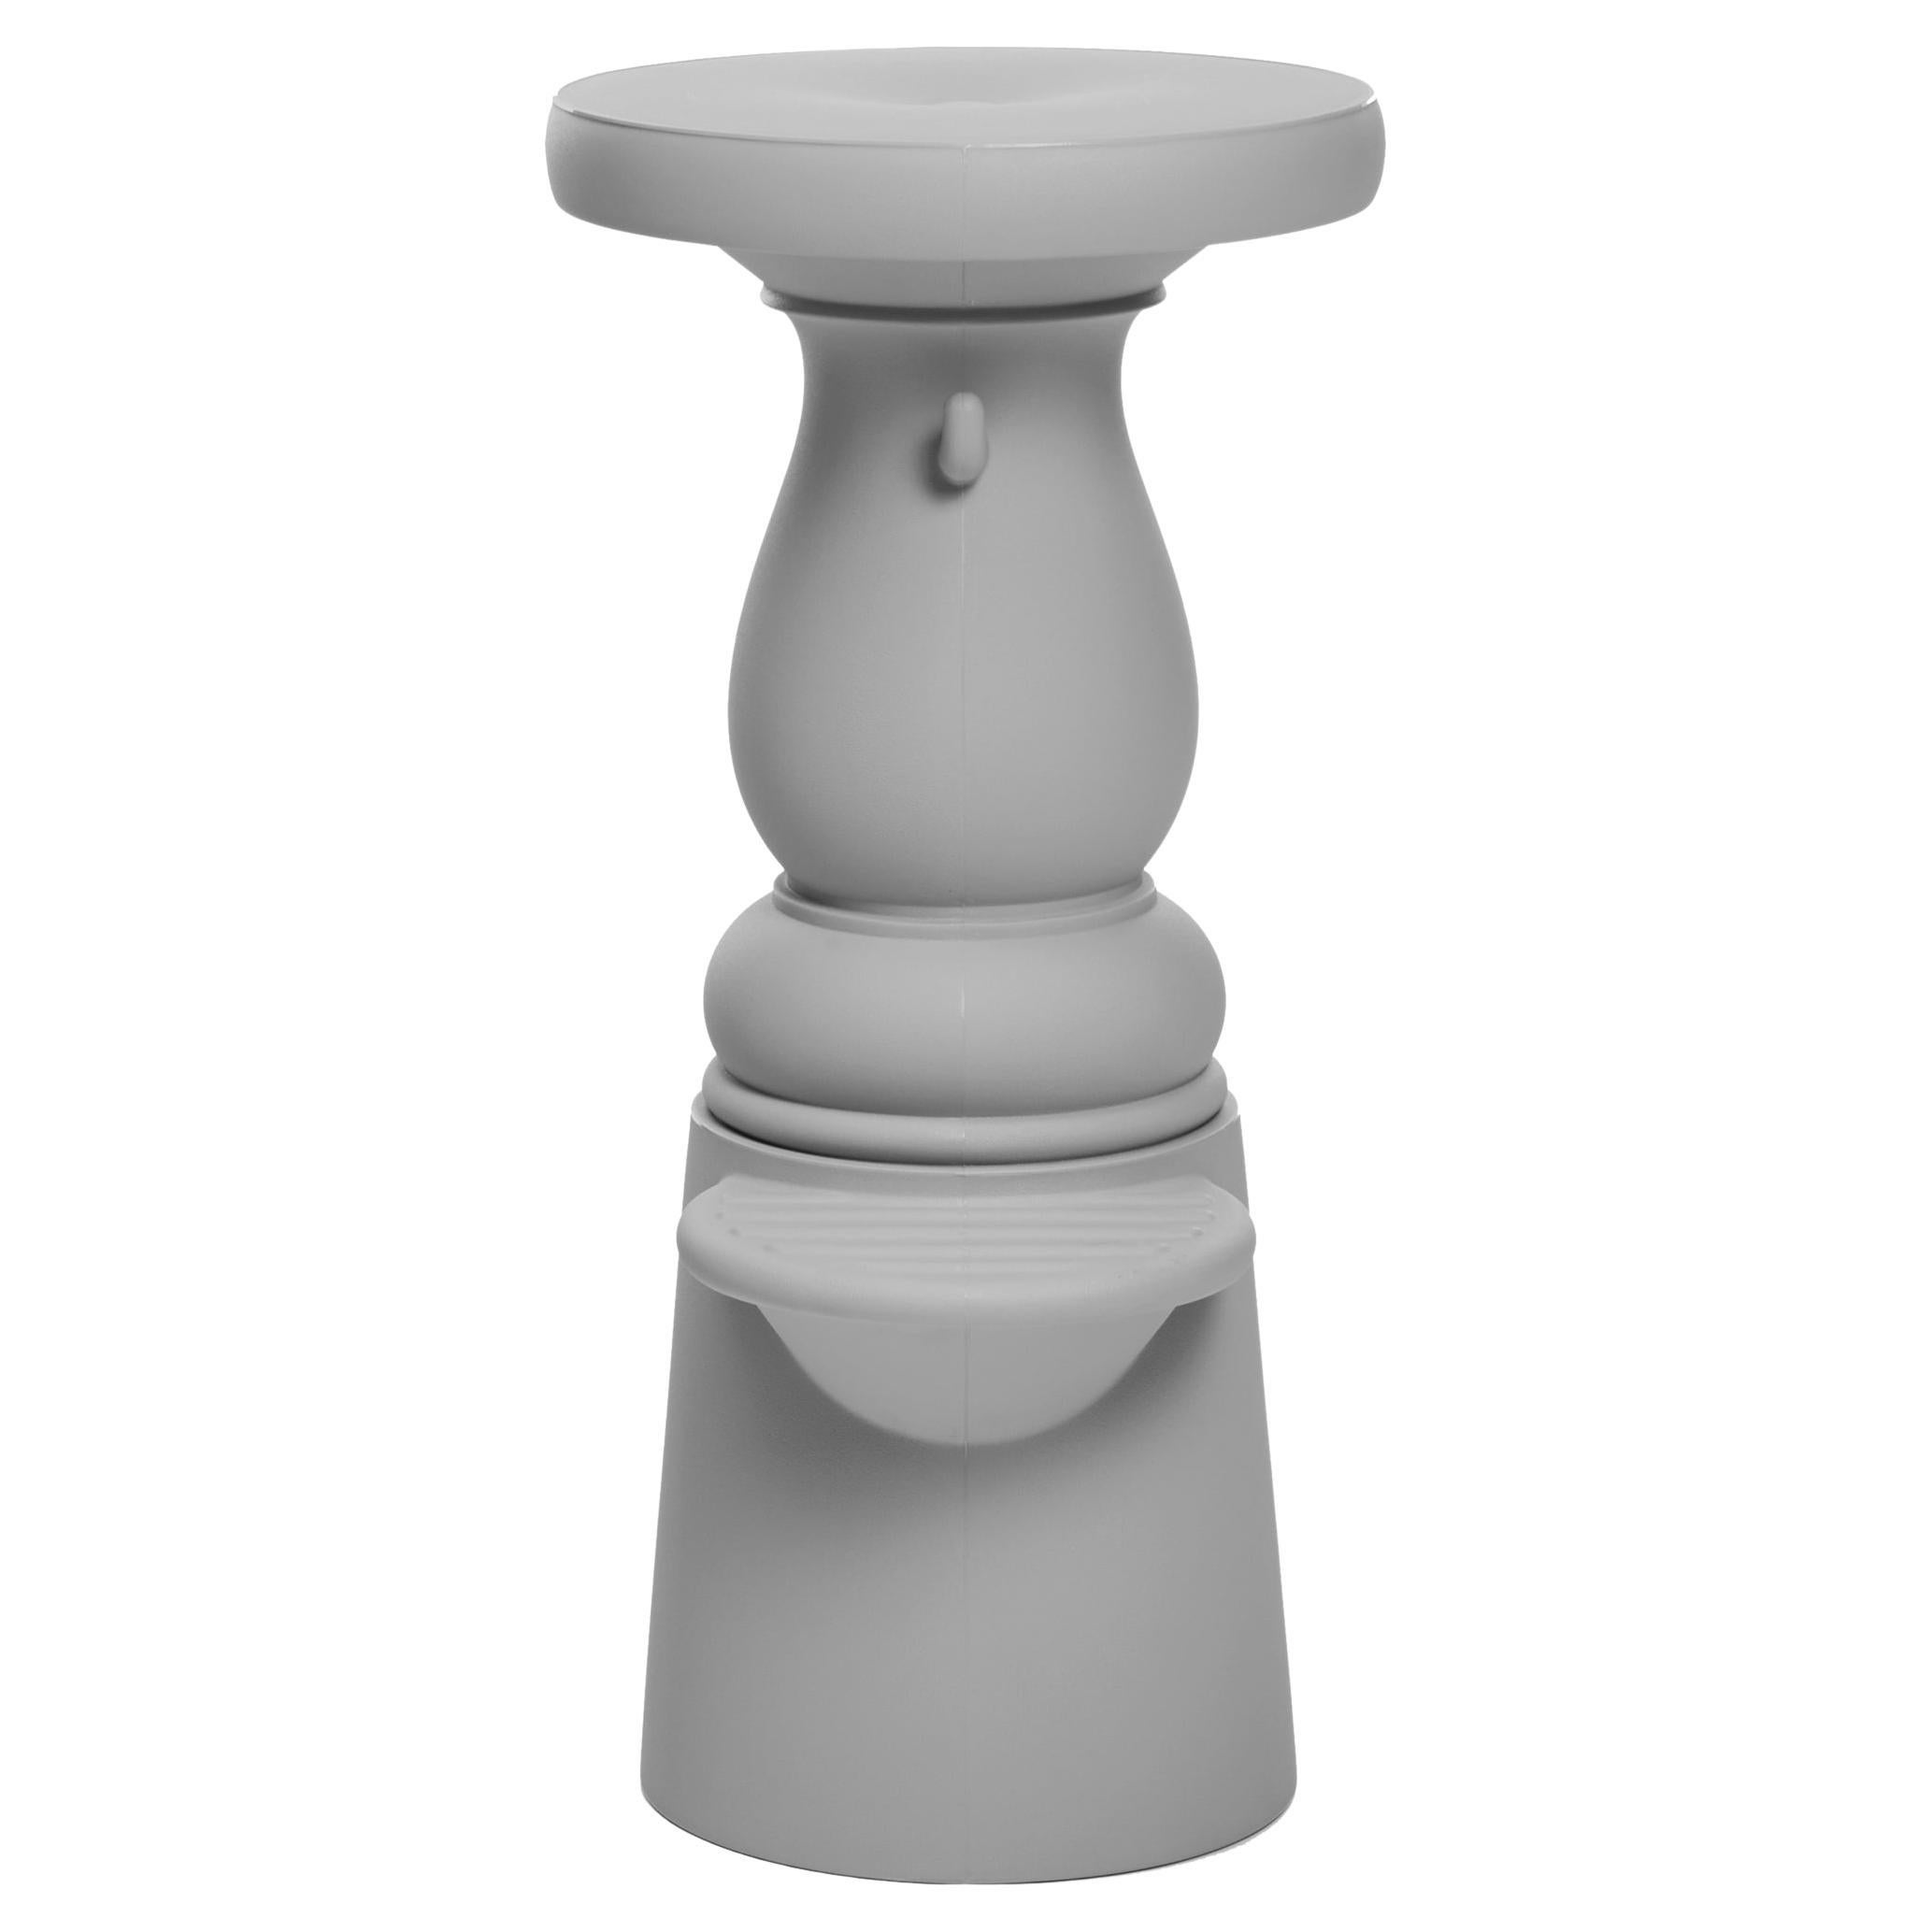 Moooi Container New Antiques High Bar Stool in Light Grey, Marcel Wanders Studio